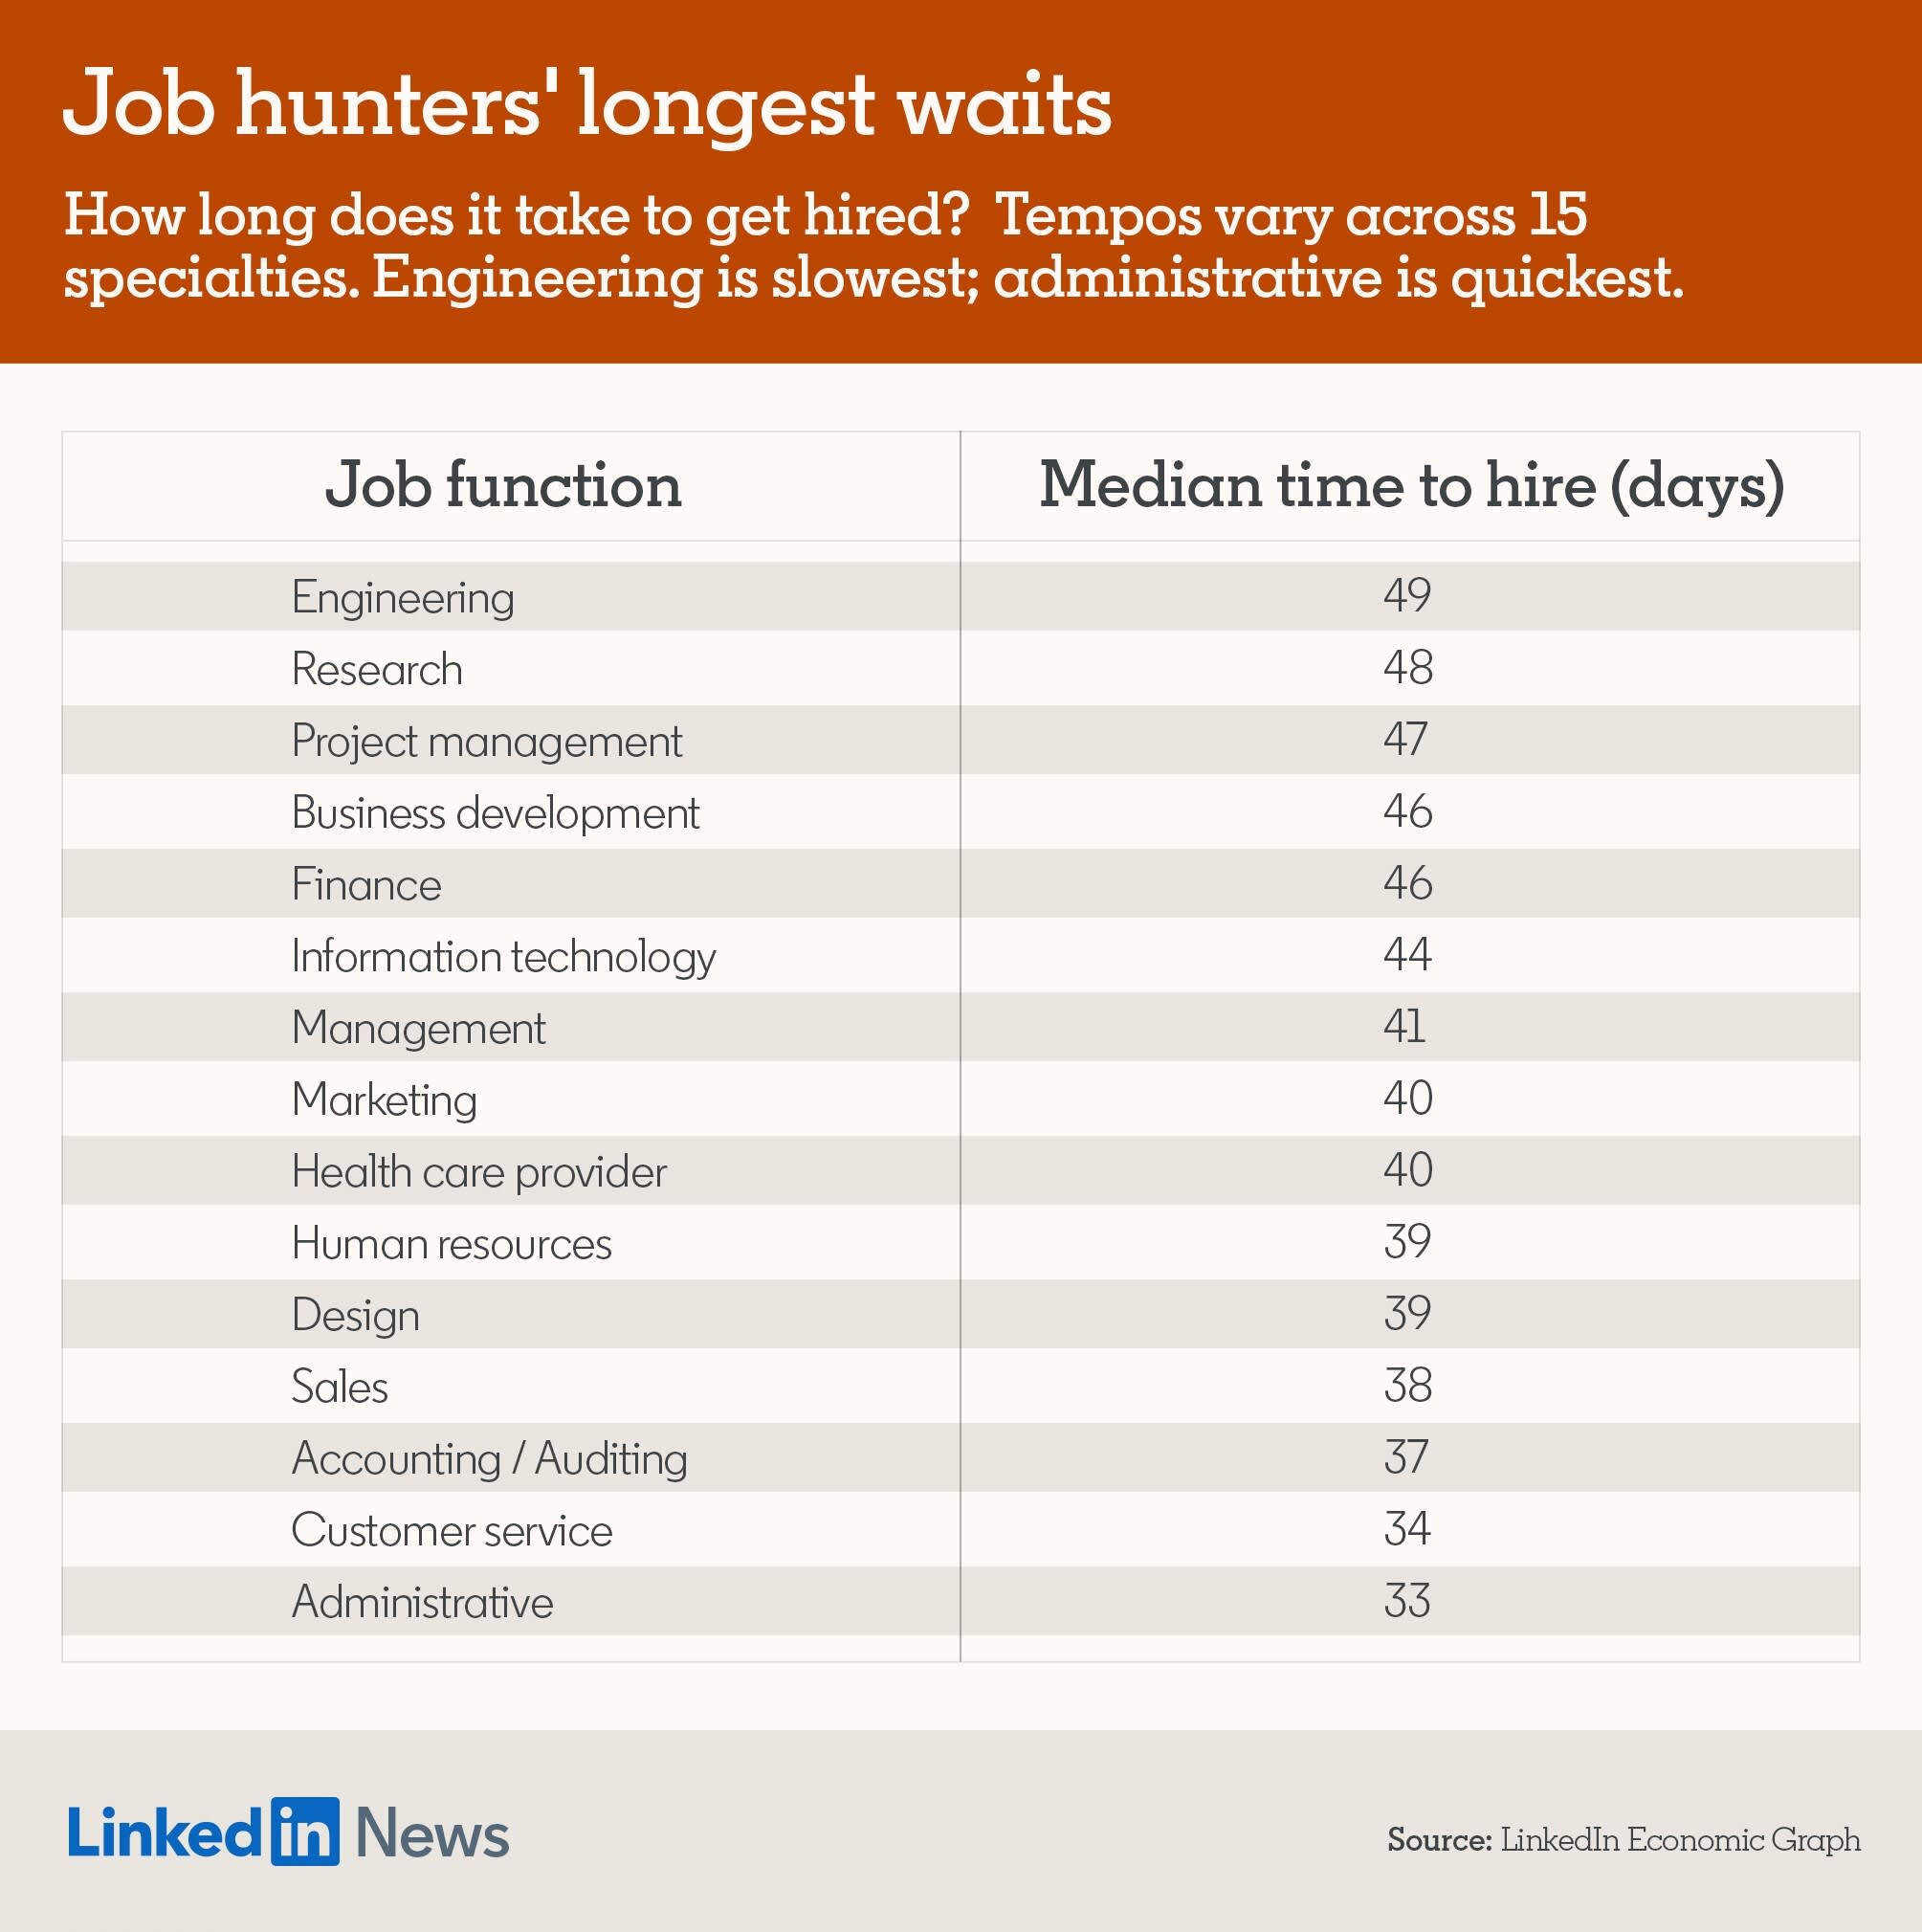 The average time to hire across industries